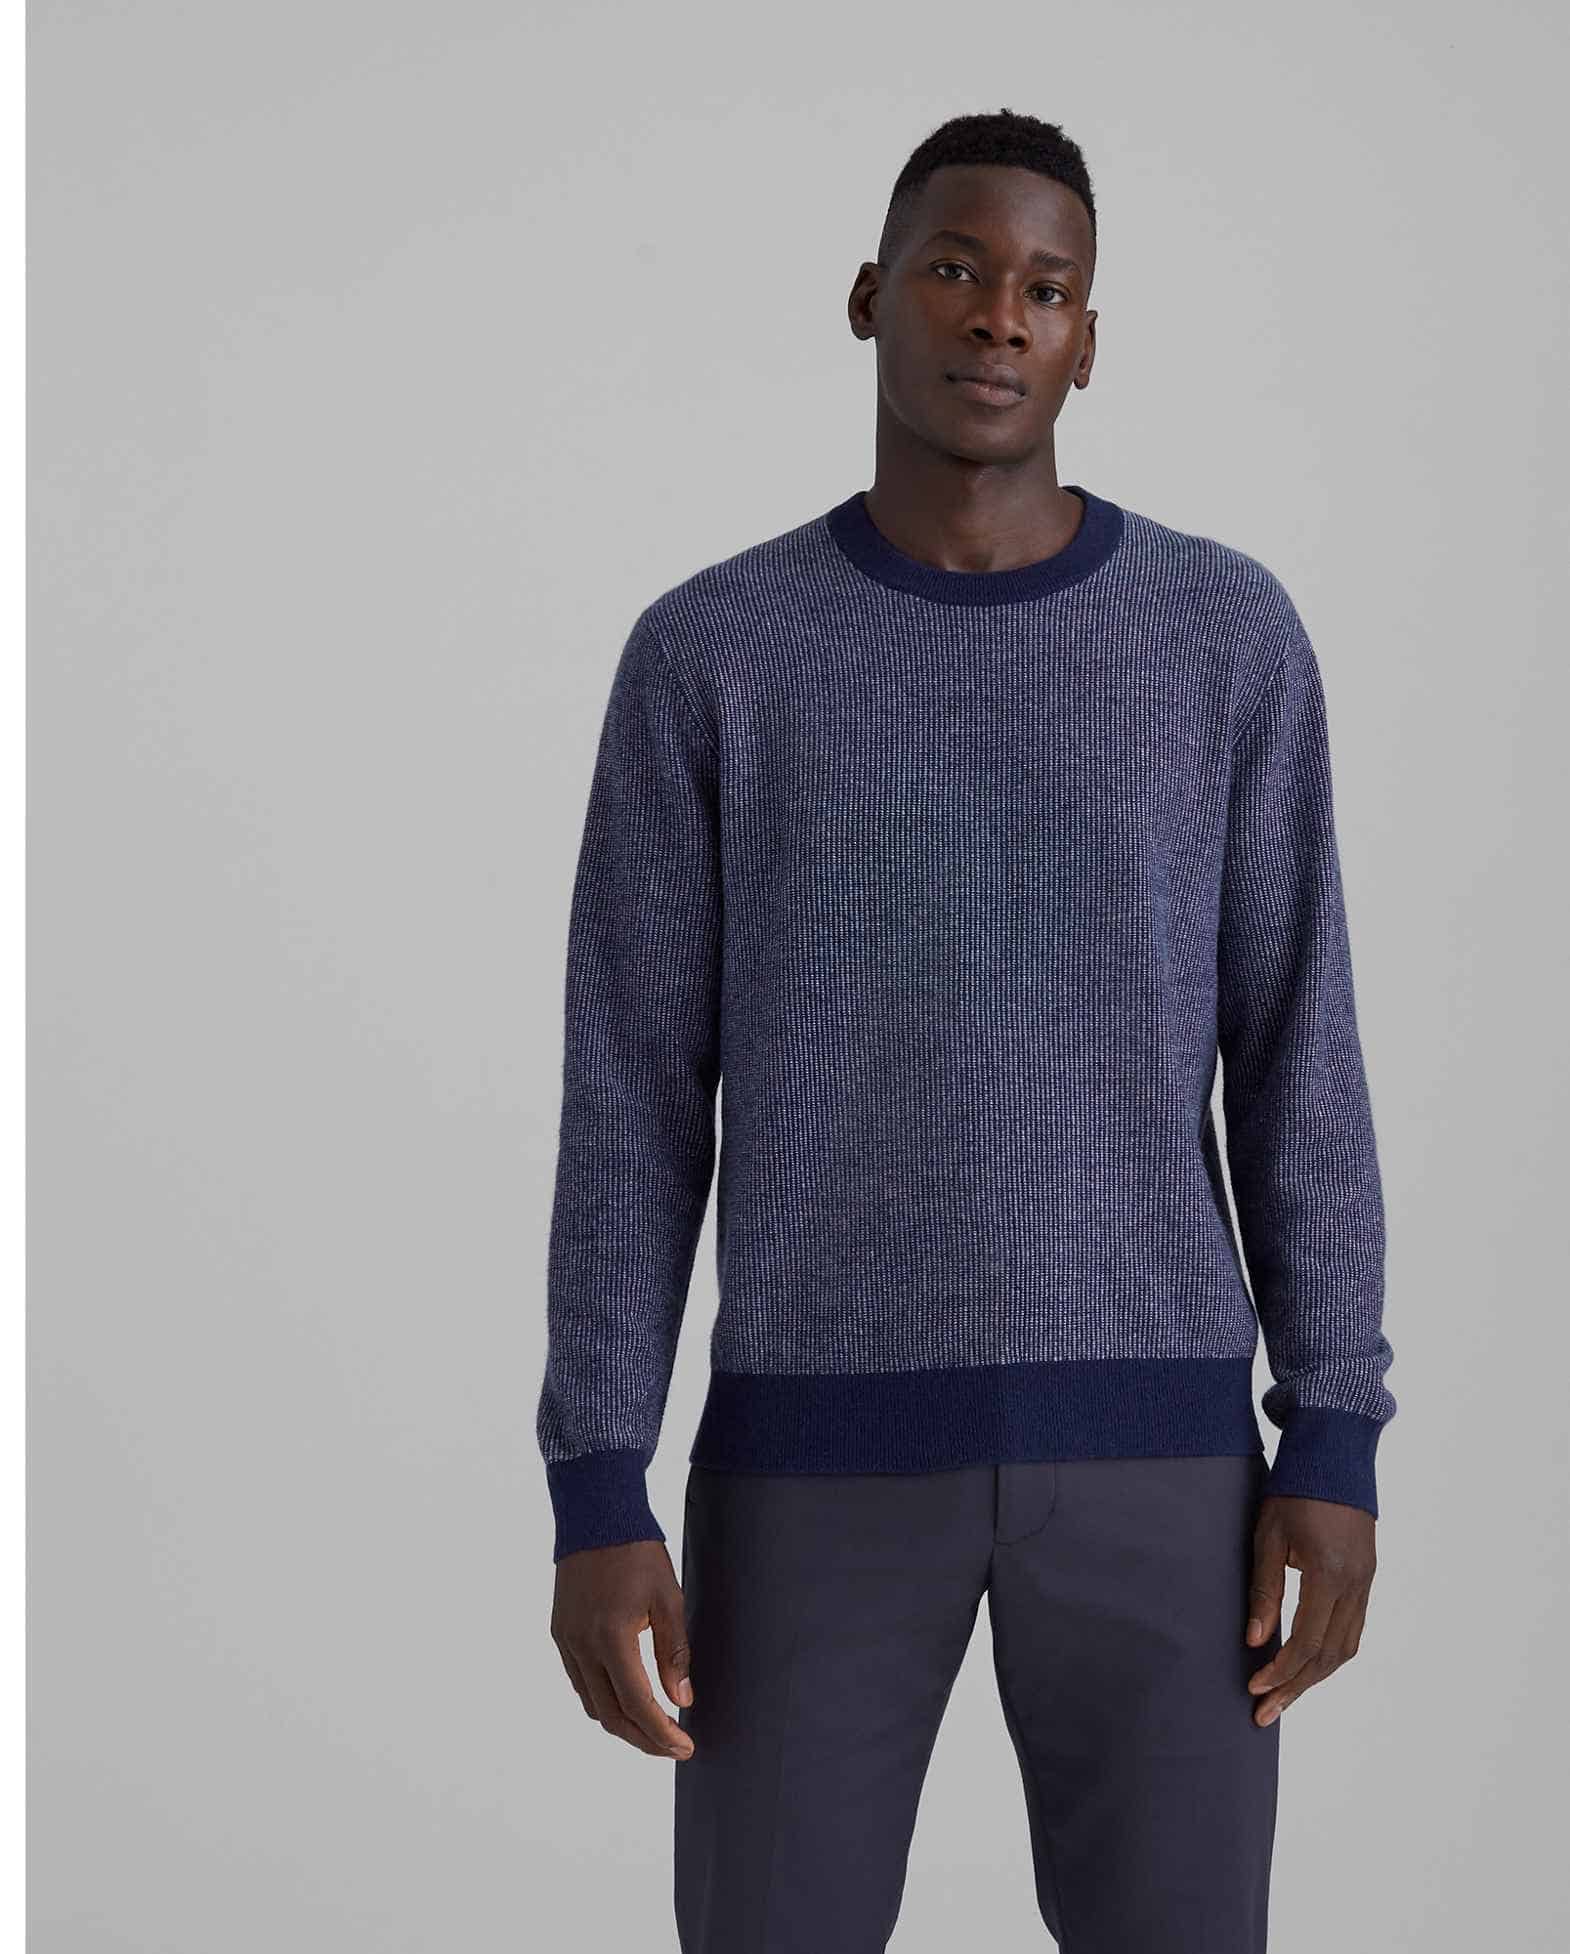 The Most Comfortable Cashmere Sweaters for Men | ComfortNerd